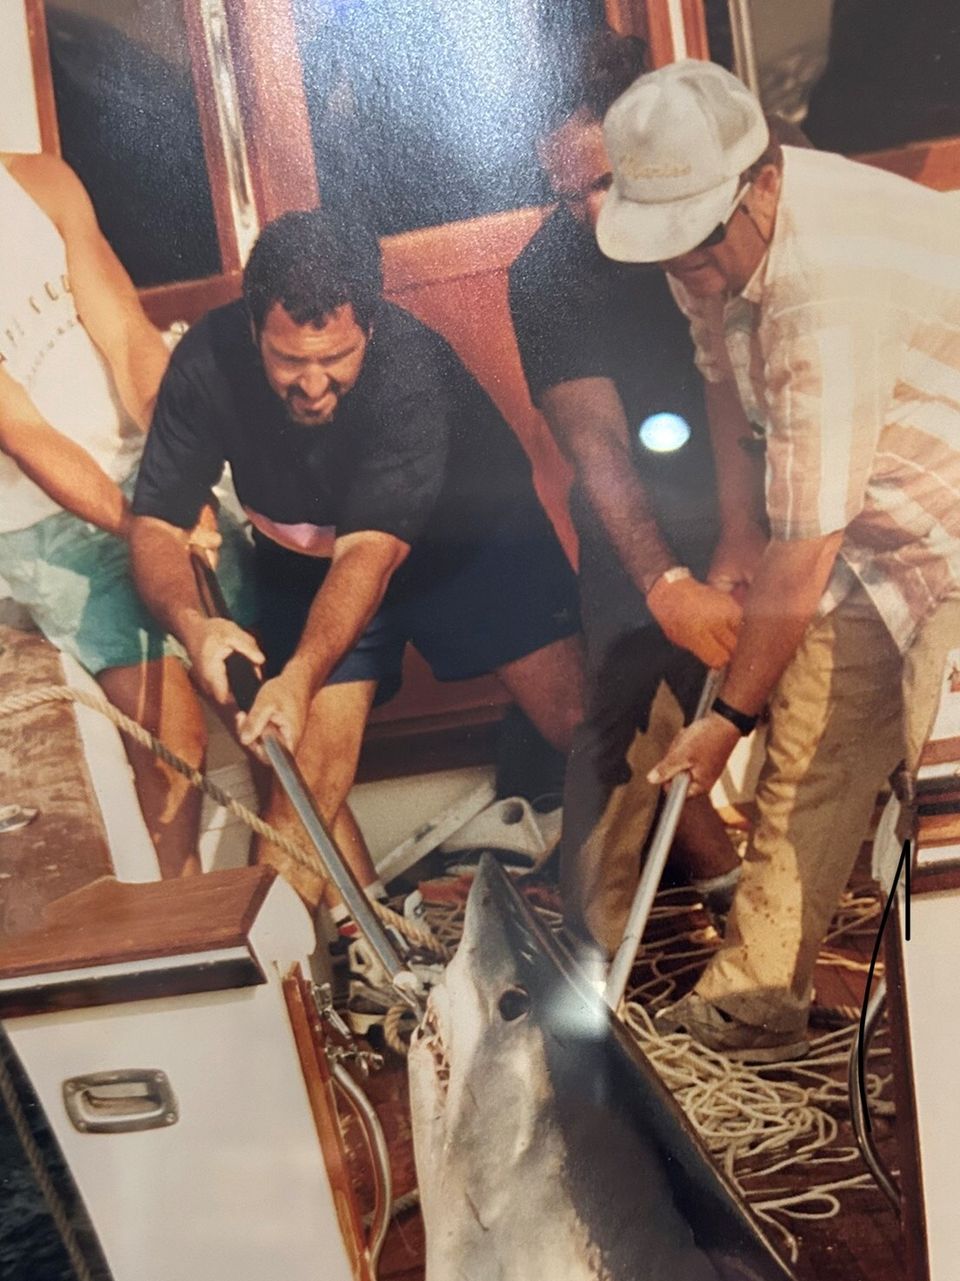 Men getting the shark out of ocean into polar  bear boat